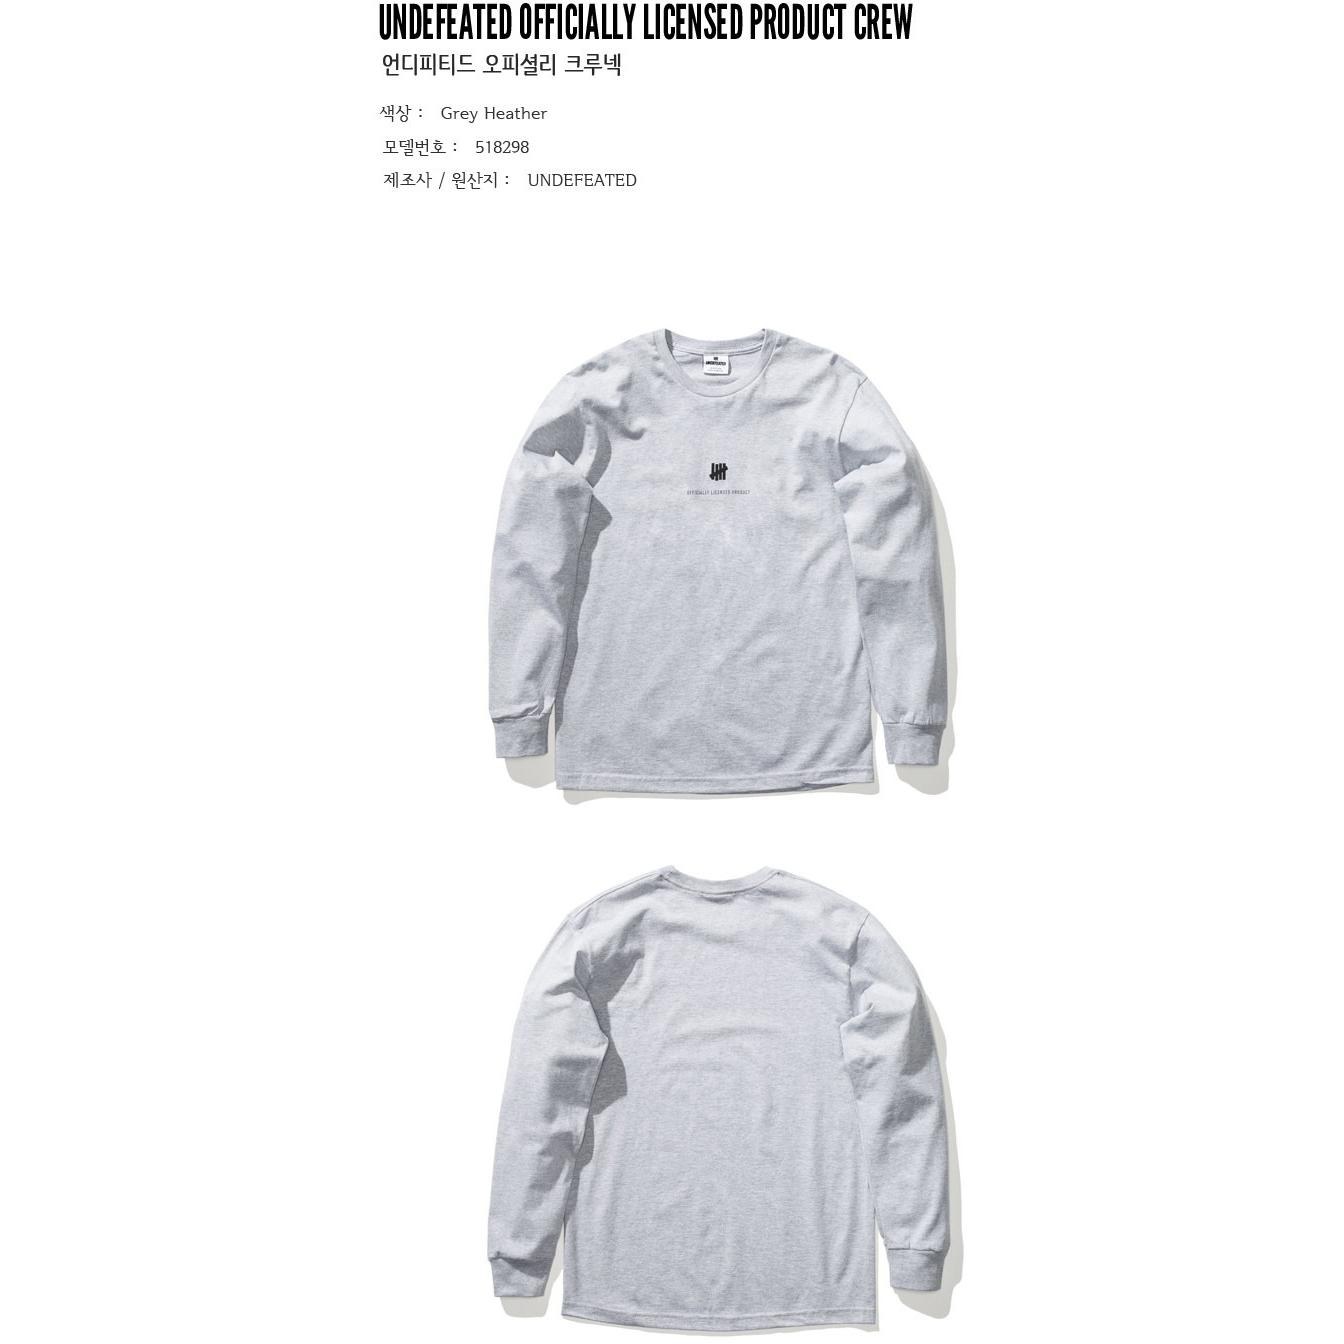 UNDEFEATED Officially Licensed Product Crew Grey Heather 518298.